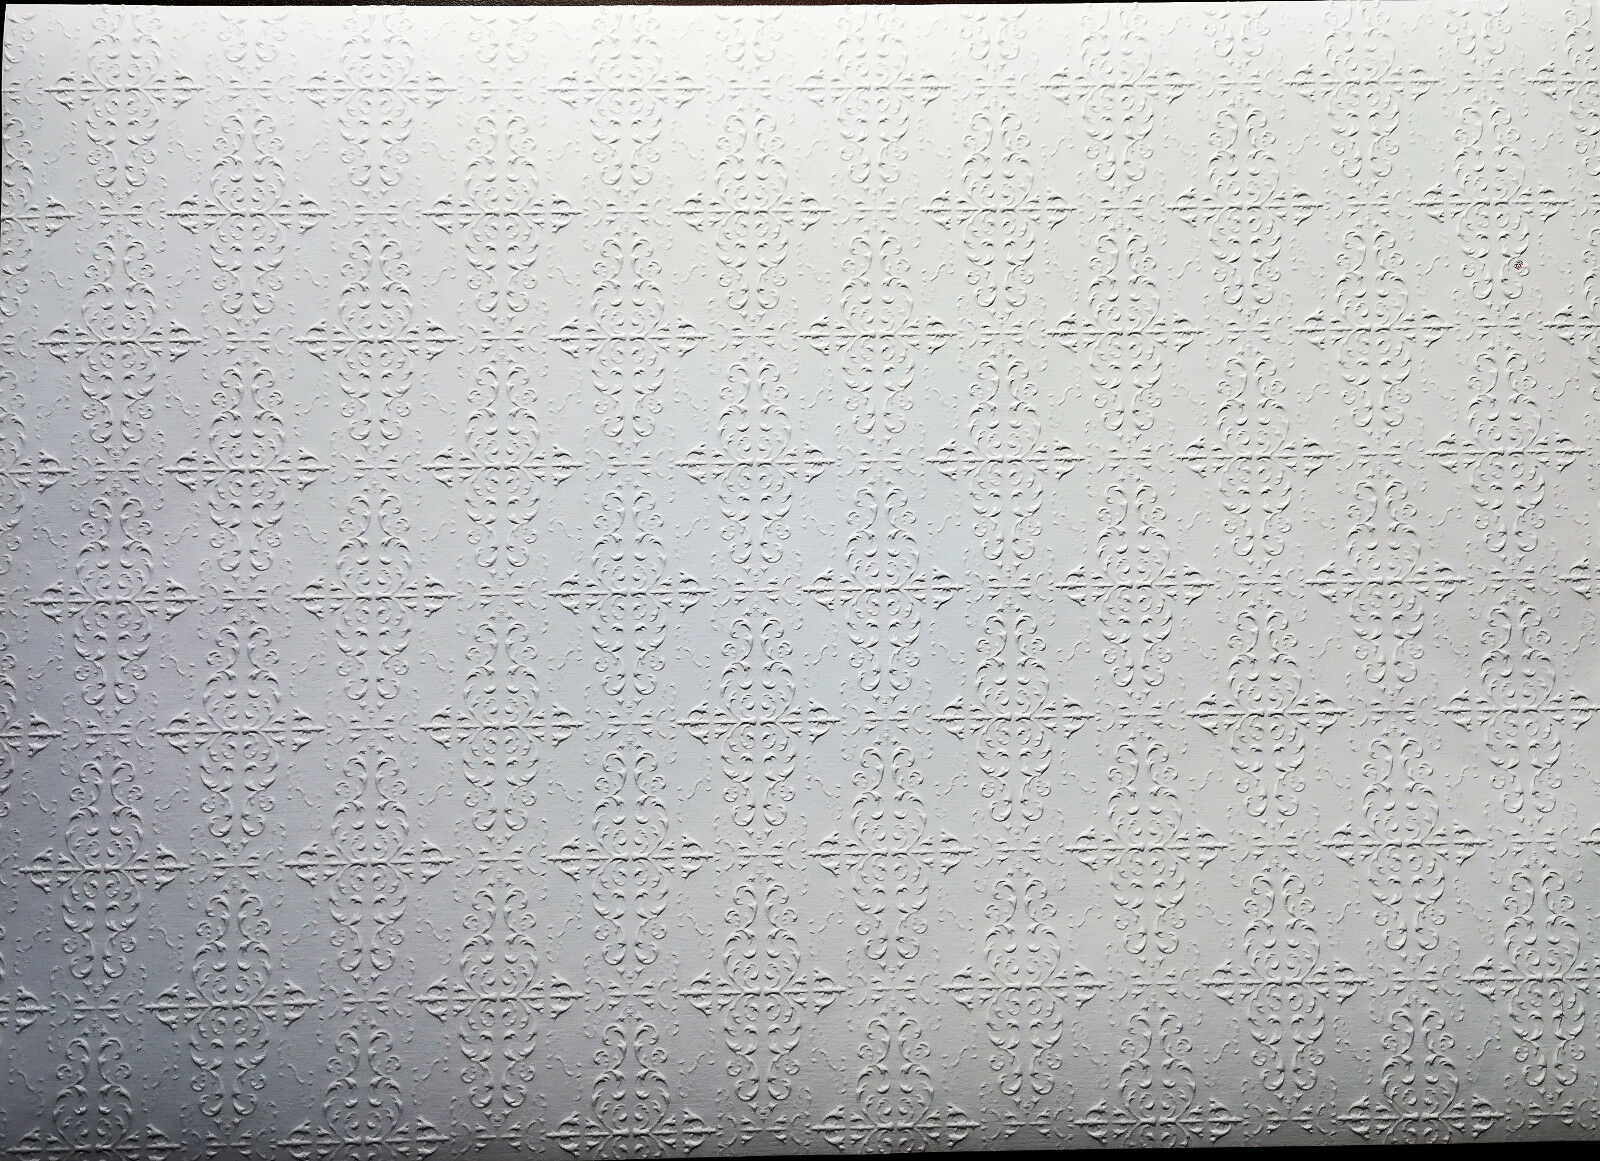 Dollhouse Miniature Embossed Textured Ceiling Paper 1:12 Scale 17 "x 12"